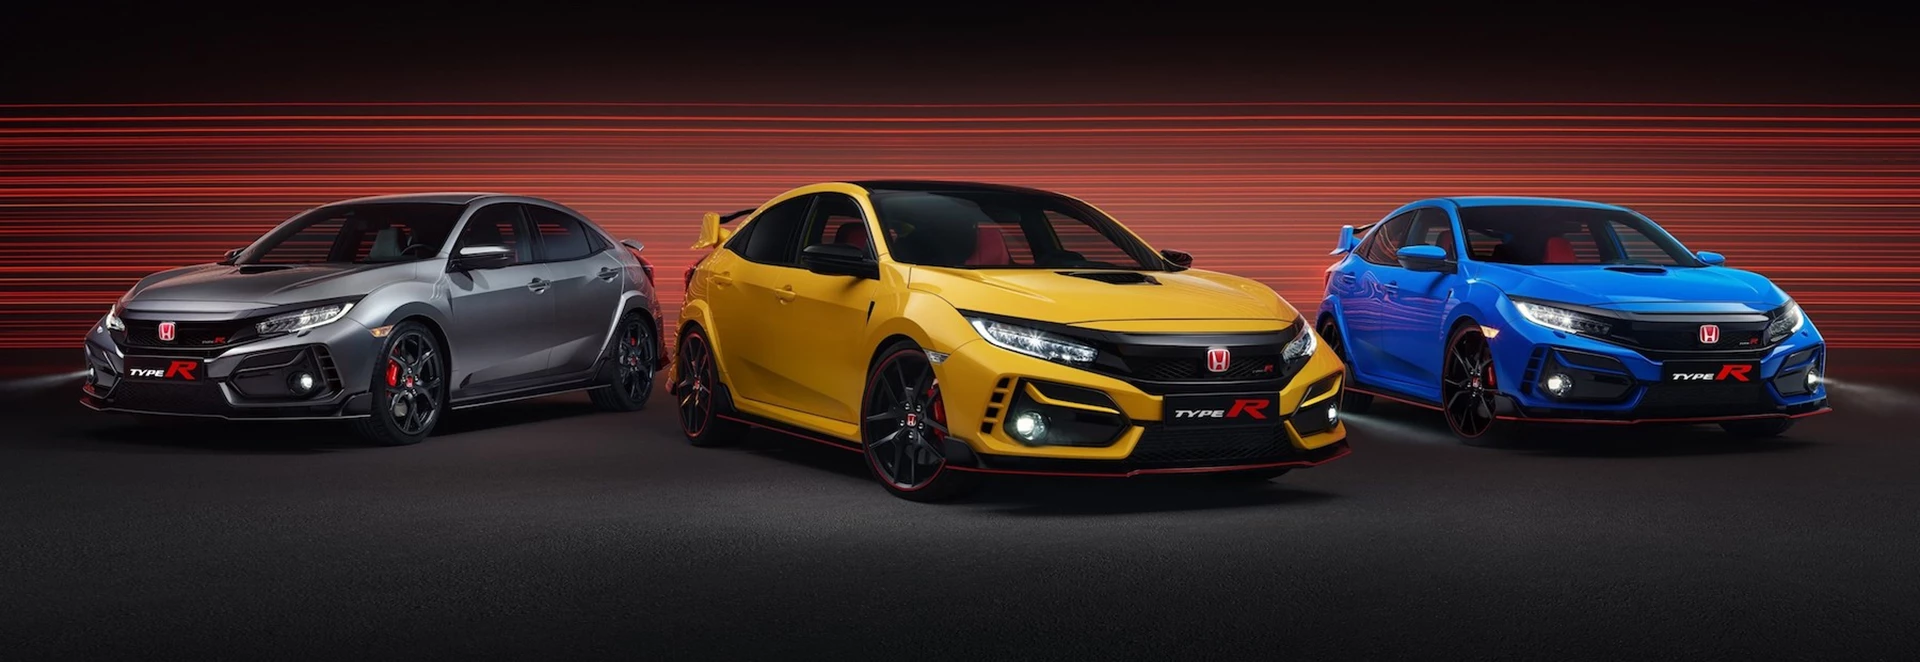 Honda announces pricing for updated Civic Type R hot hatch 